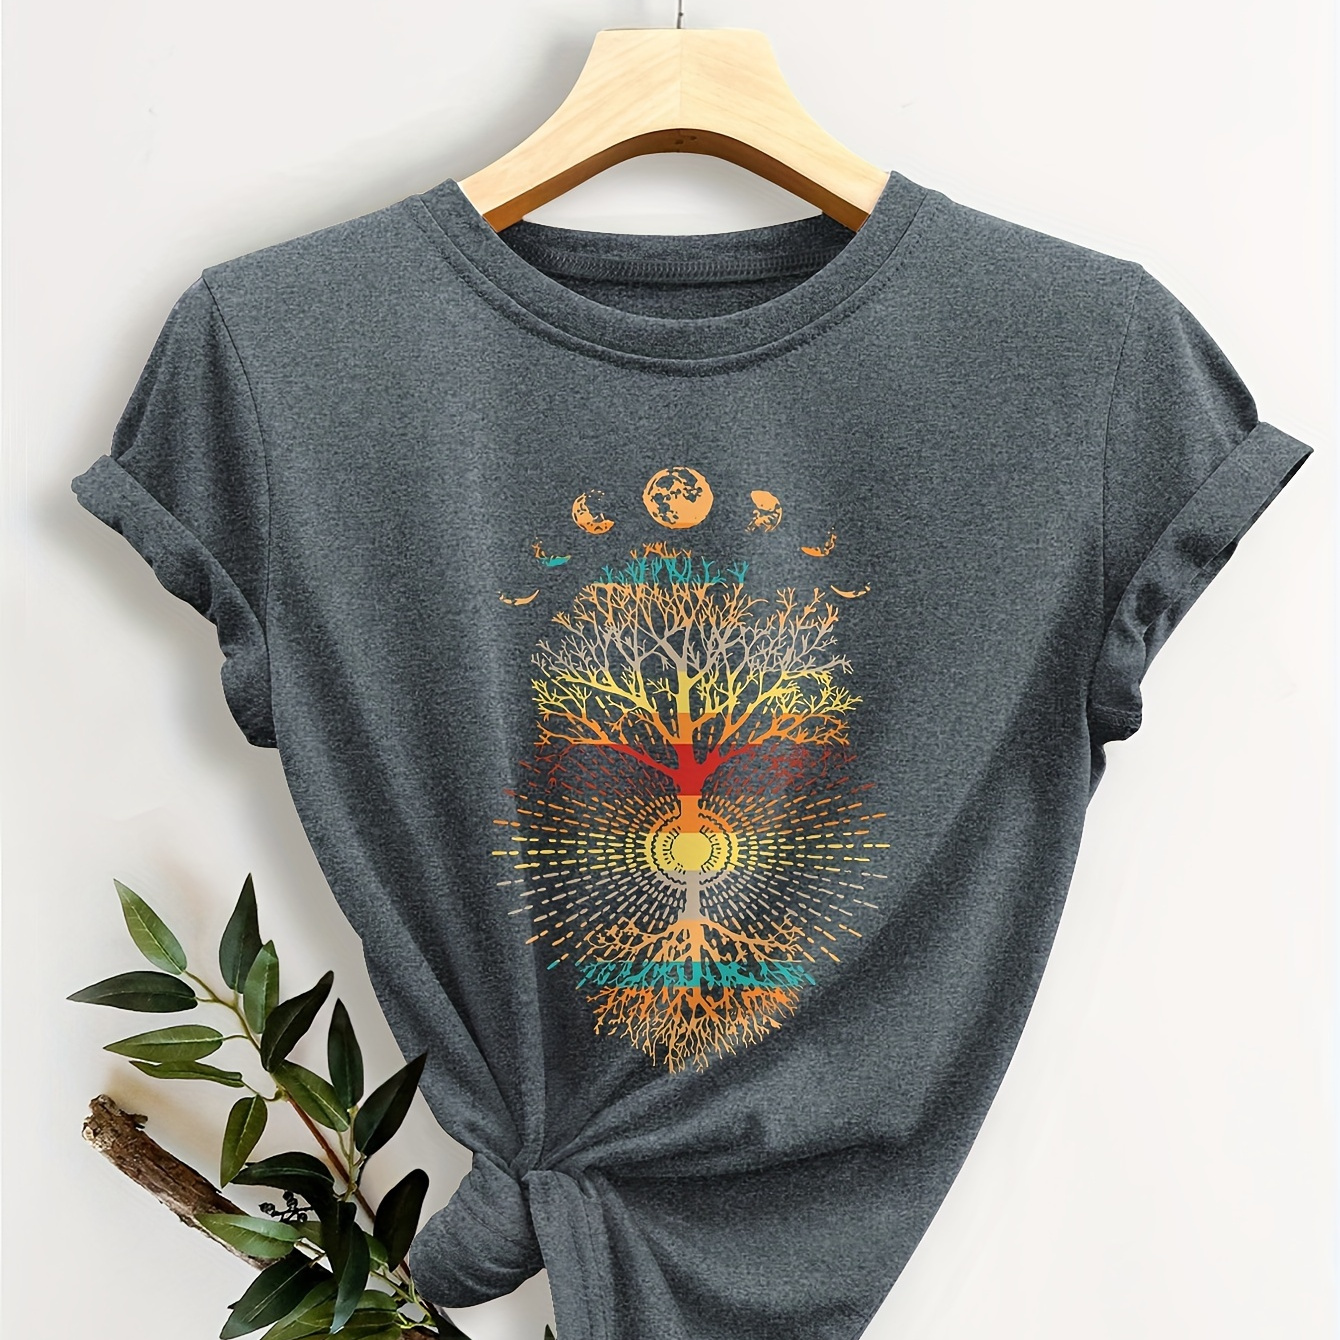 

Women's Vintage Tree And Moon Reflection Print Casual T-shirt, Short Sleeve Round Neck Top, Fashion Retro Style, Sporty Summer Tee